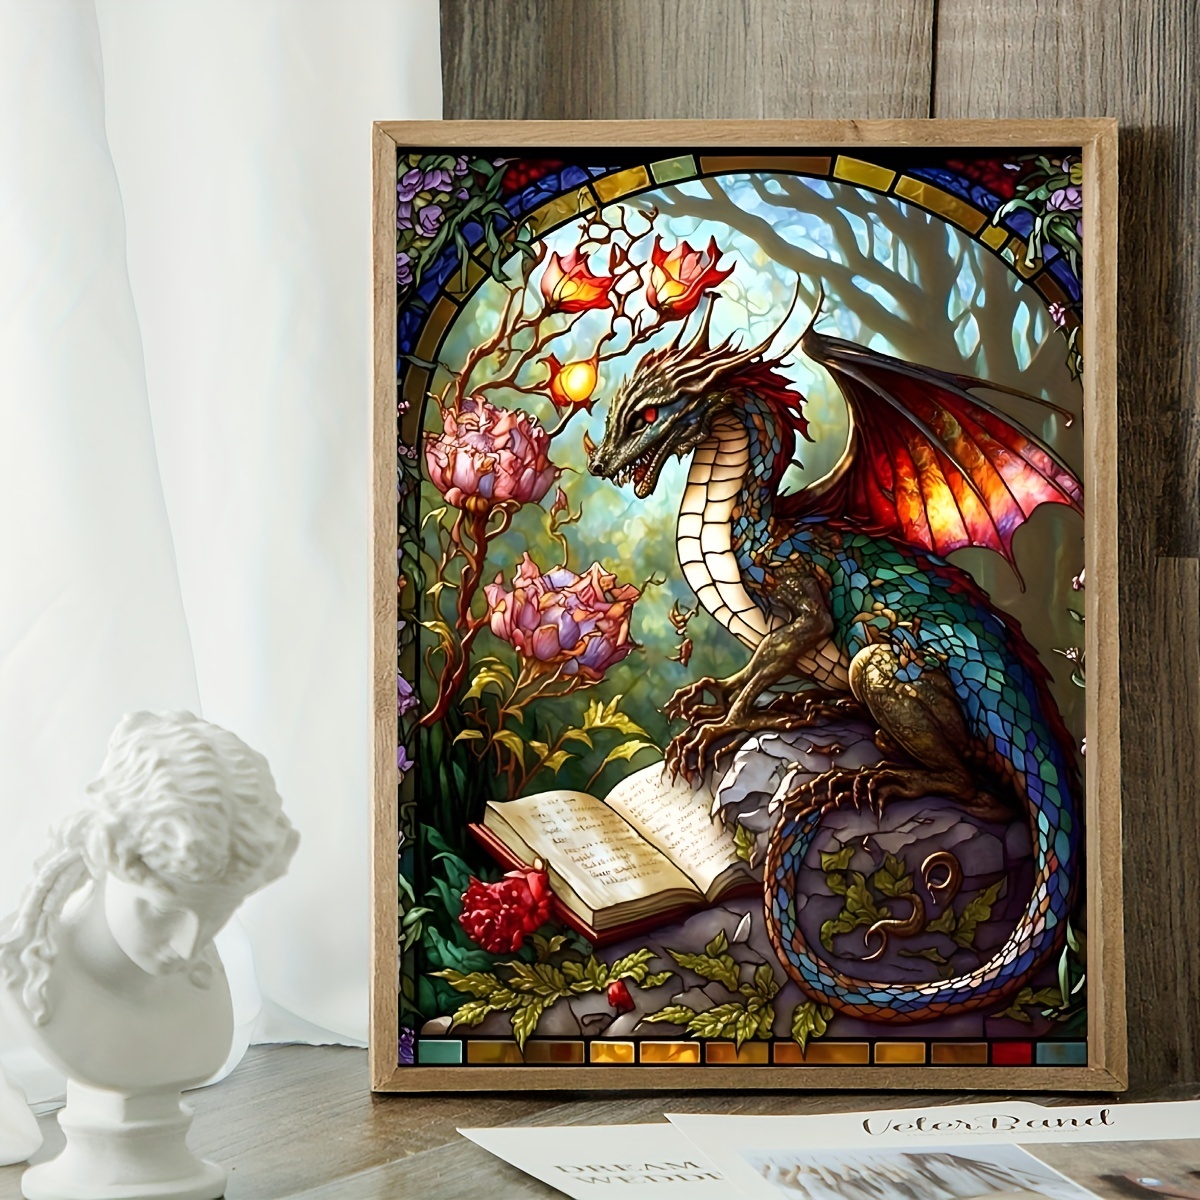 Adult Diamond Painting Kits White Dragon and Black Dragon - Full Diamond  Canvas DIY Sparkling Gemstone Art Painting Stress Relief Crafts For Family